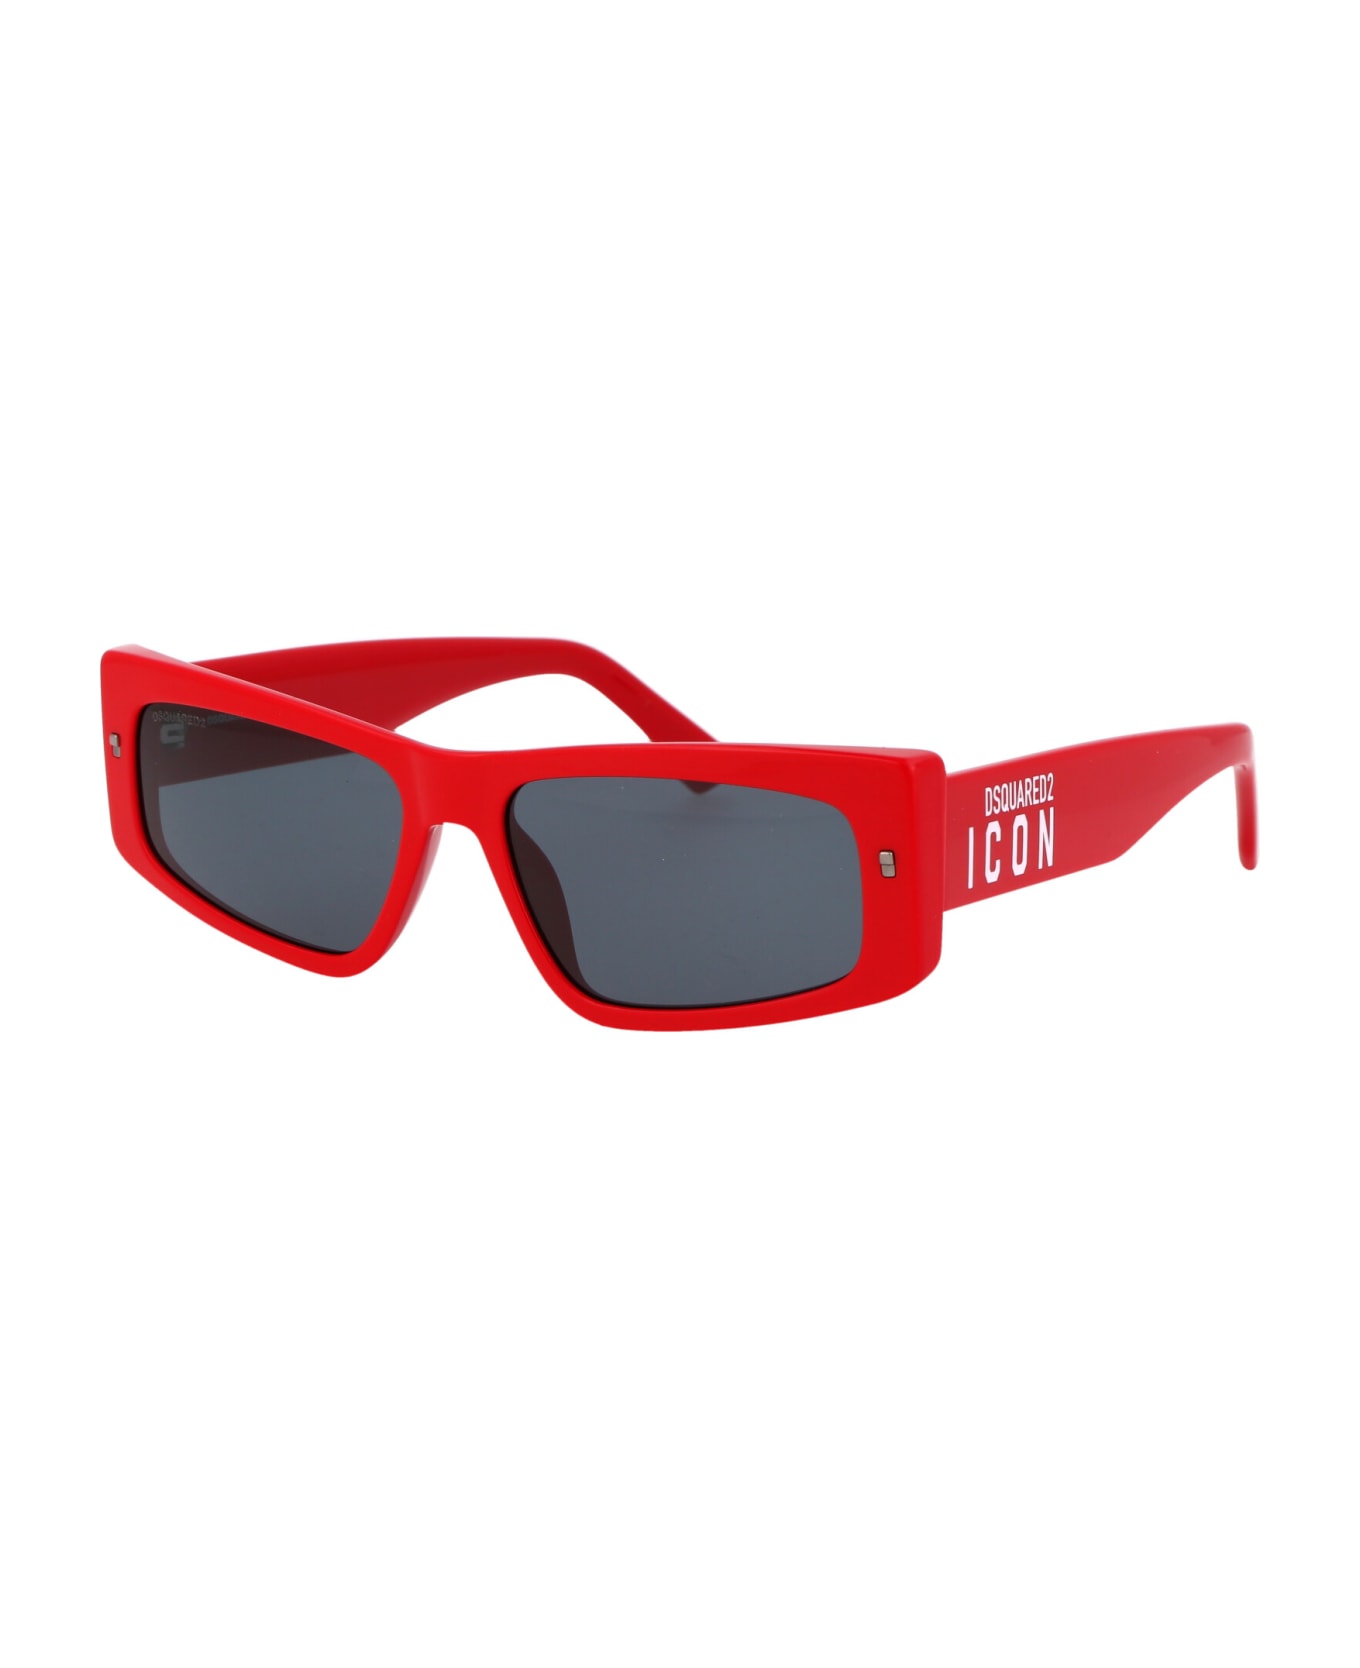 Dsquared2 Eyewear Icon 0007/s Sunglasses - C9AIR RED